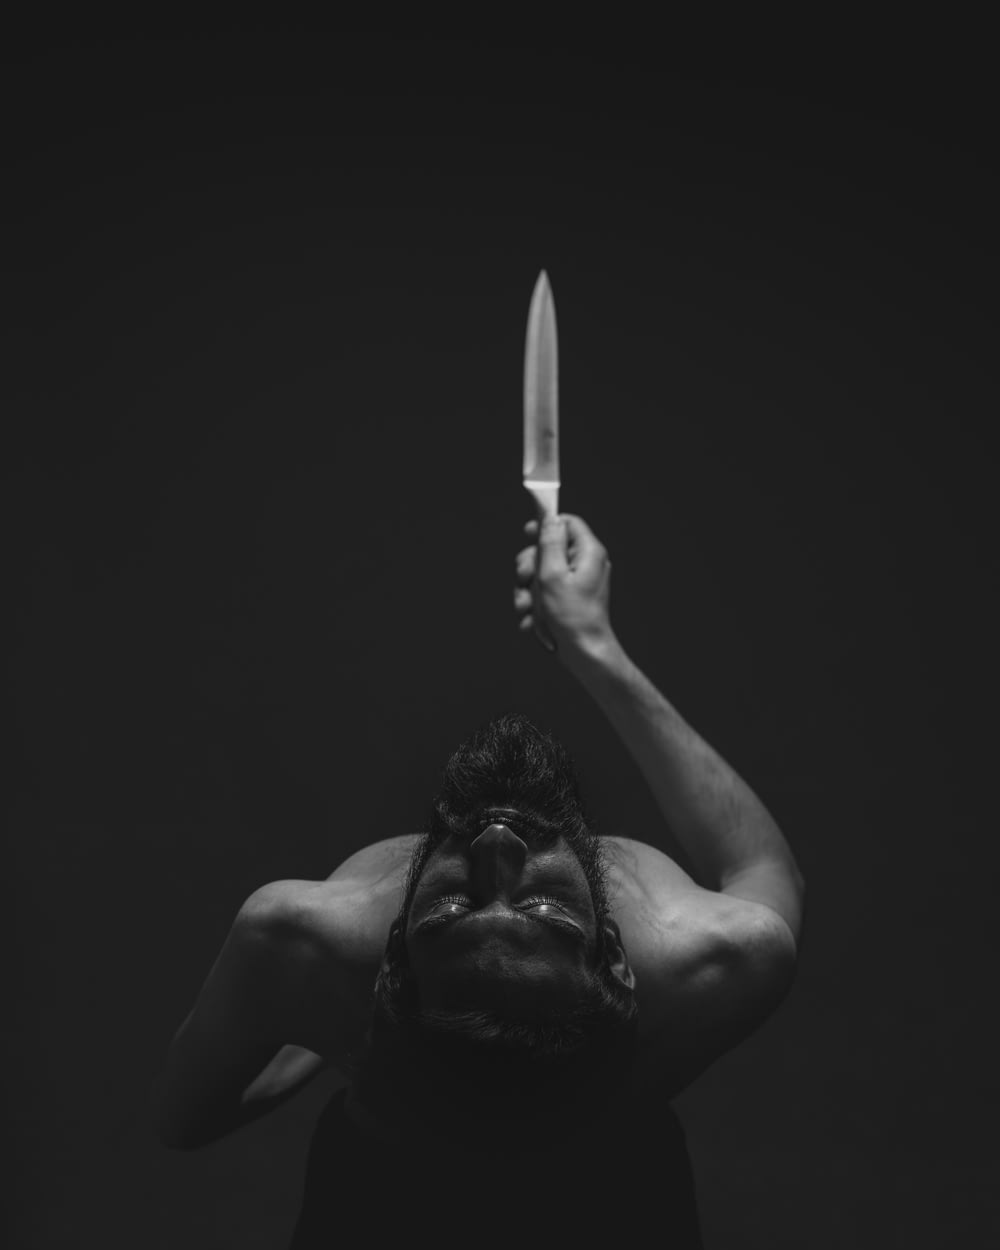 grayscale photography of man holding knife